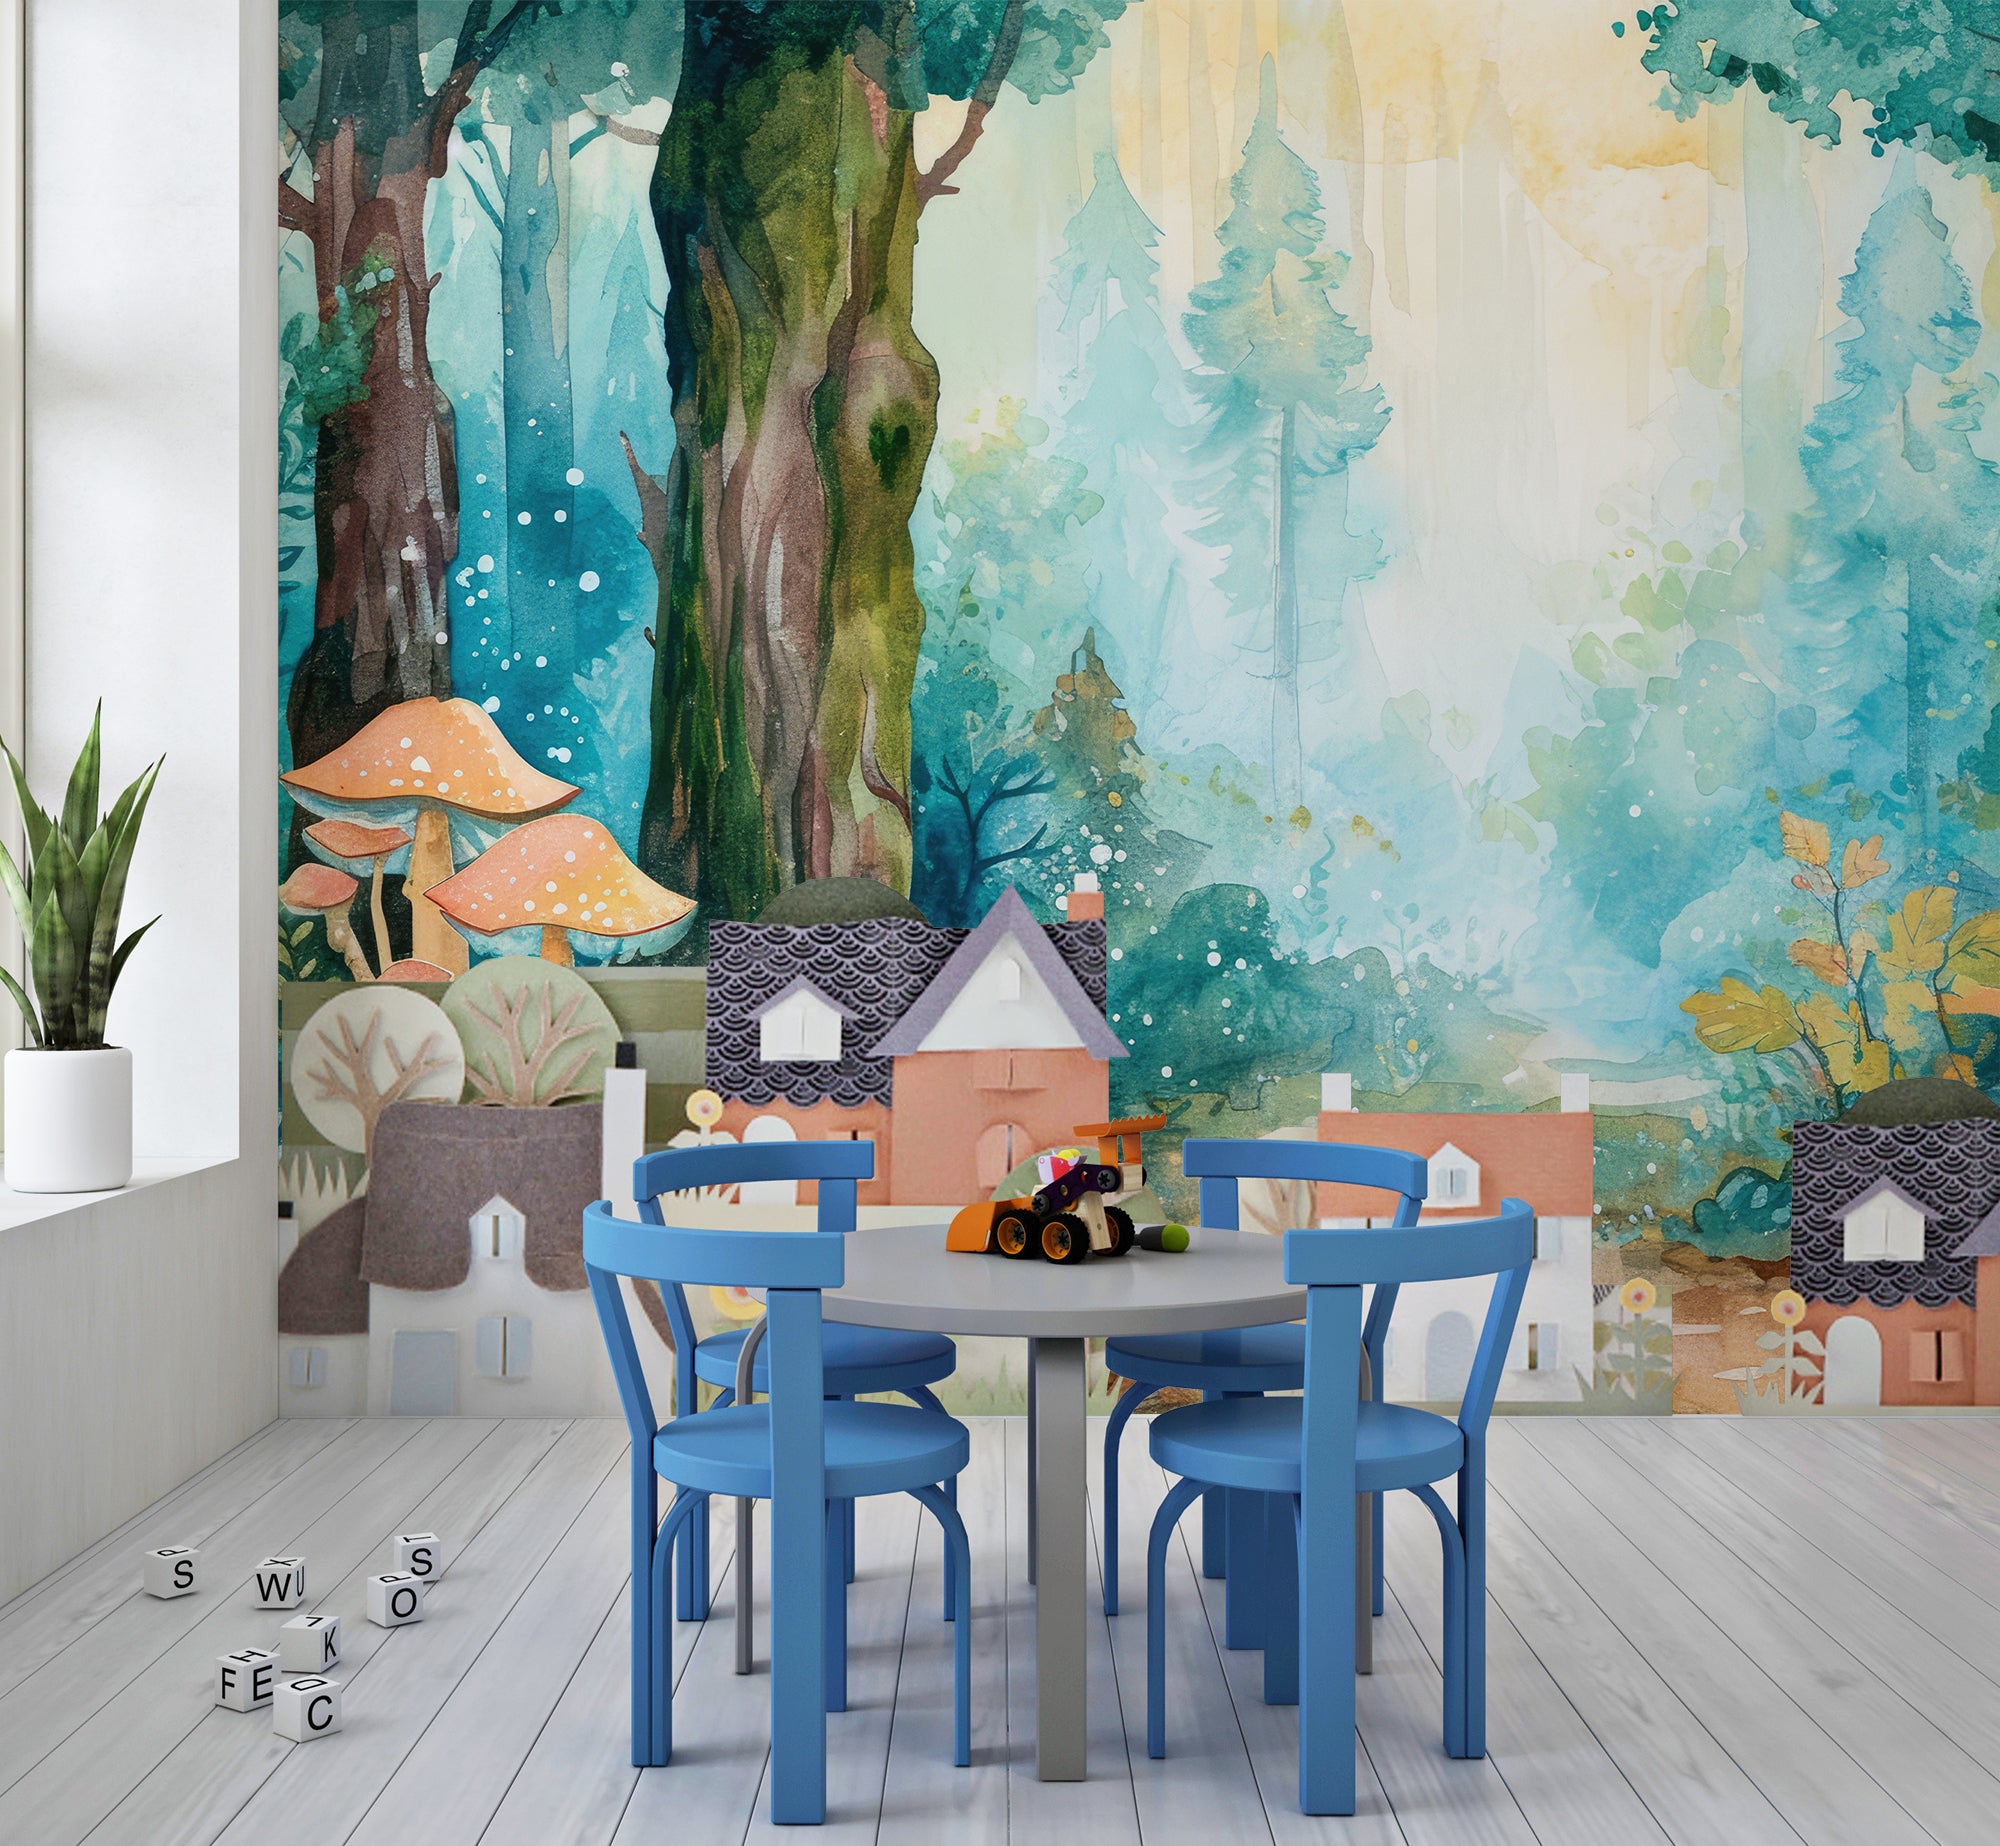 Enchanted Forest - Magical panoramic wallpaper for children's living spaces